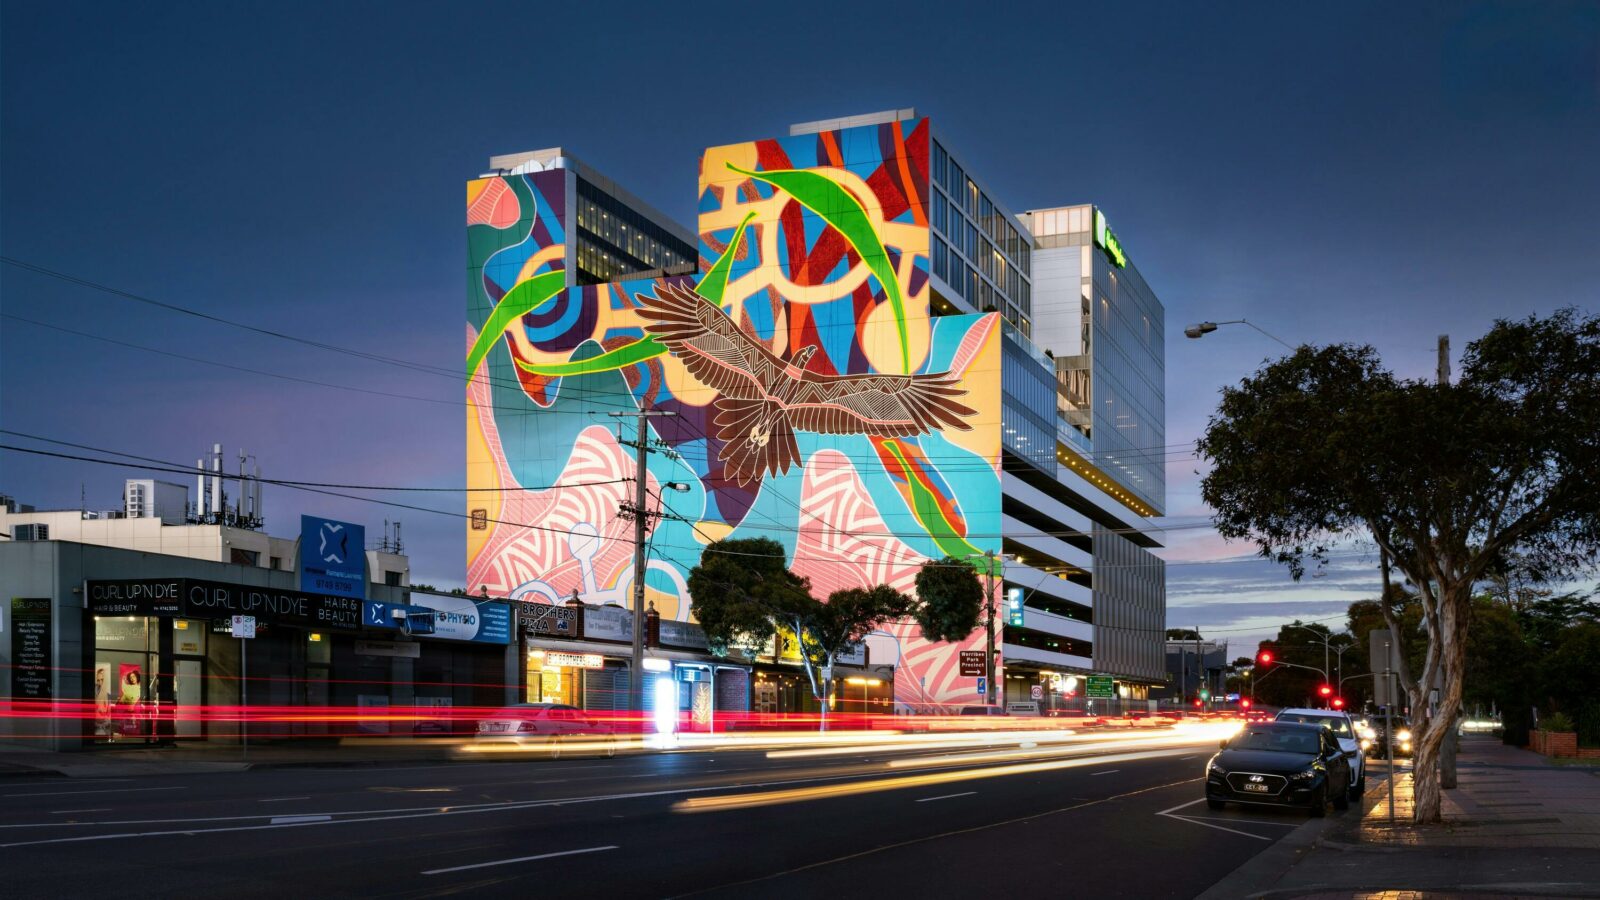 A large Indigenous mural featuring Bunjil on a building facade at night